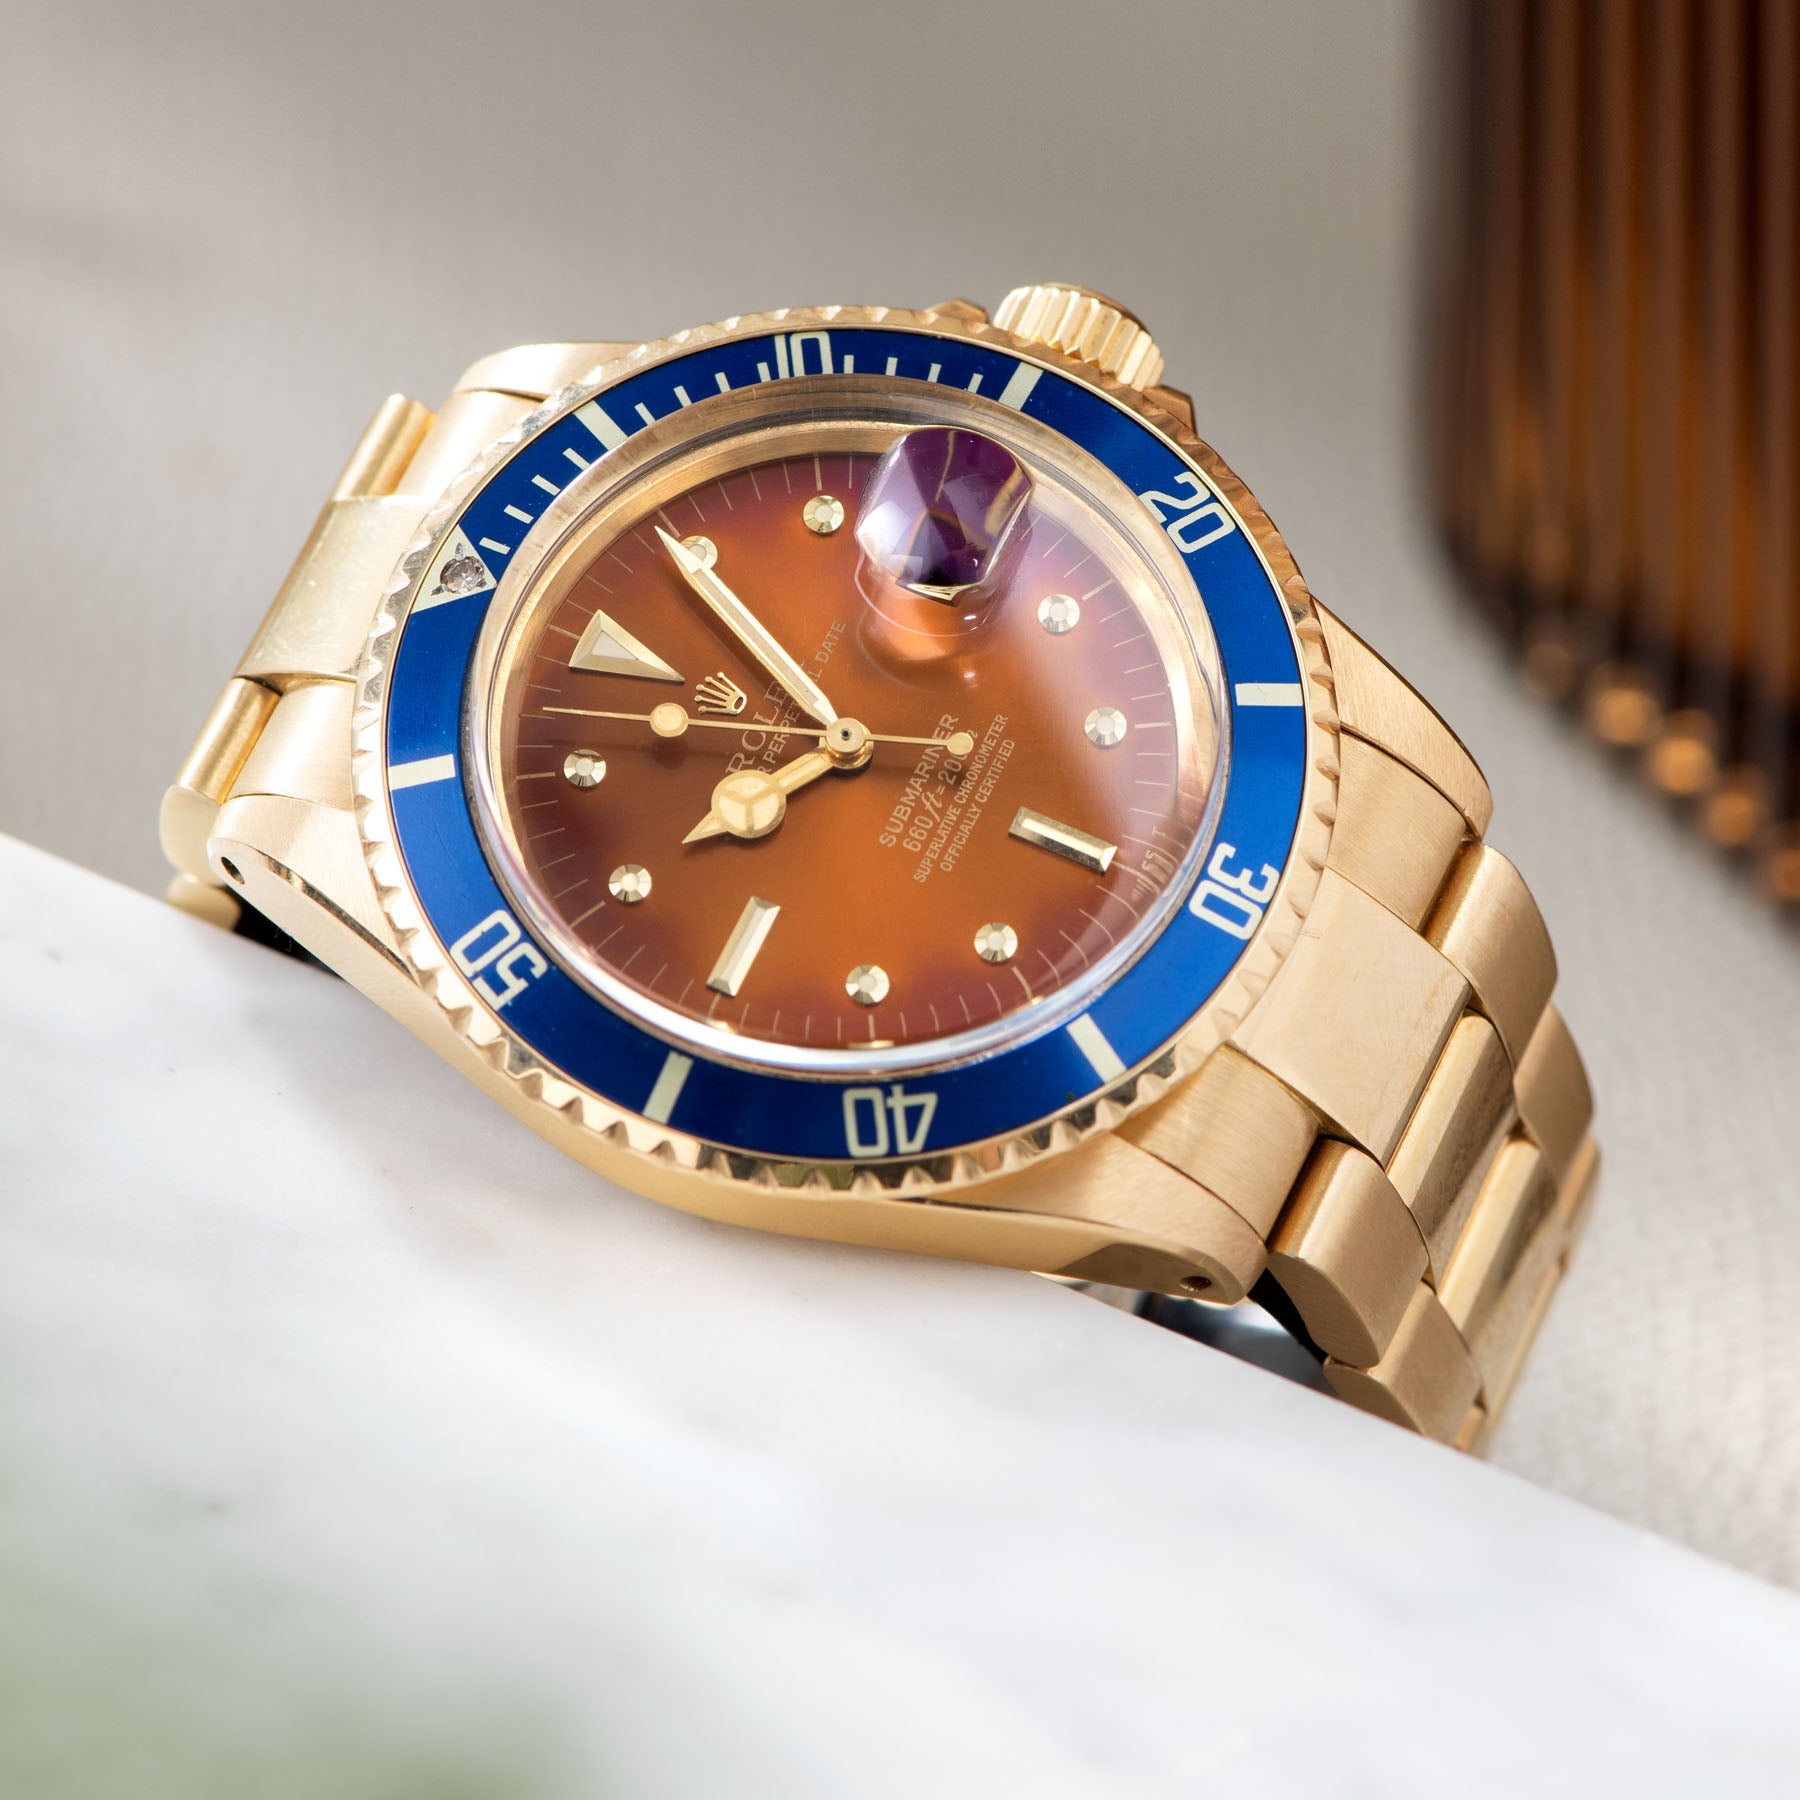 Rolex Submariner Date Yellow Gold 1680 / 8 Tropical Dial